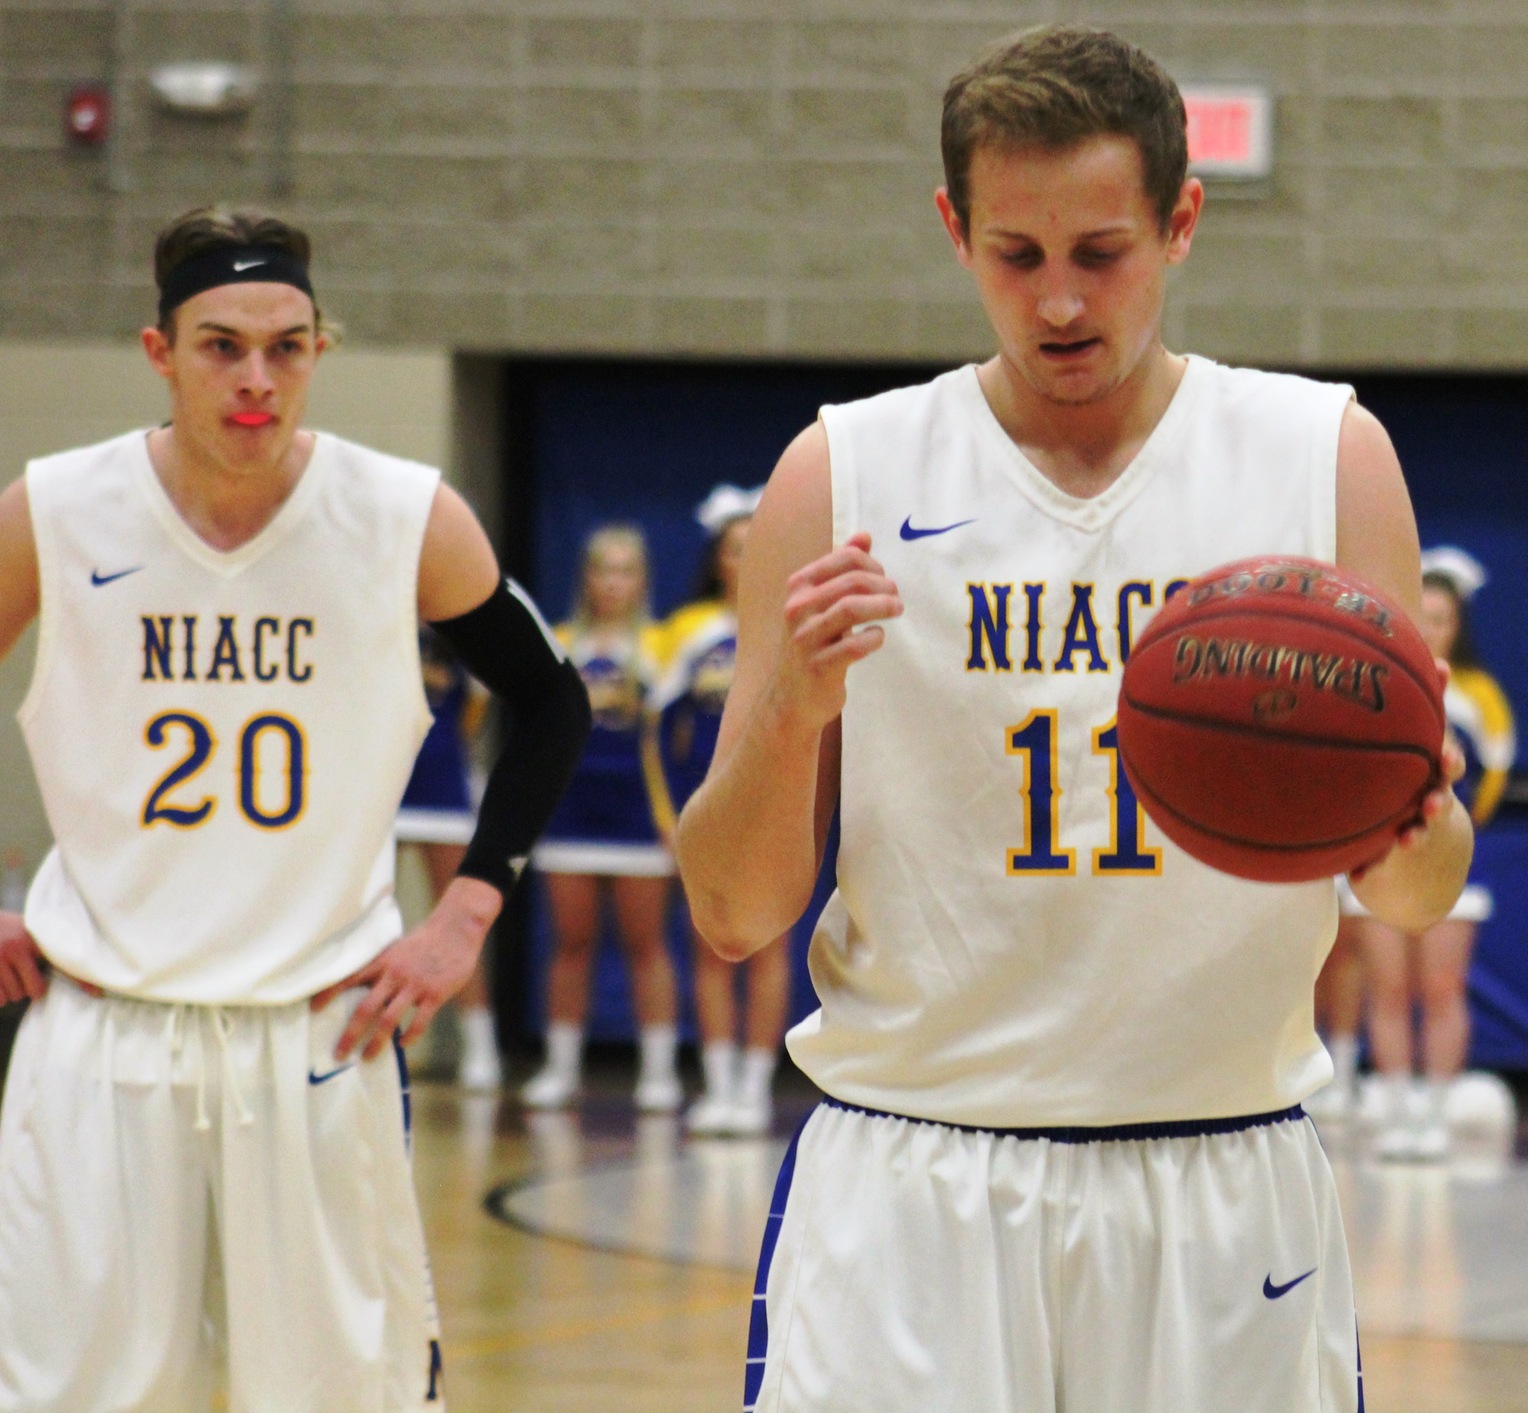 Jaycob Payne gets ready to shoot a free throw in last week's game against Riverland CC.